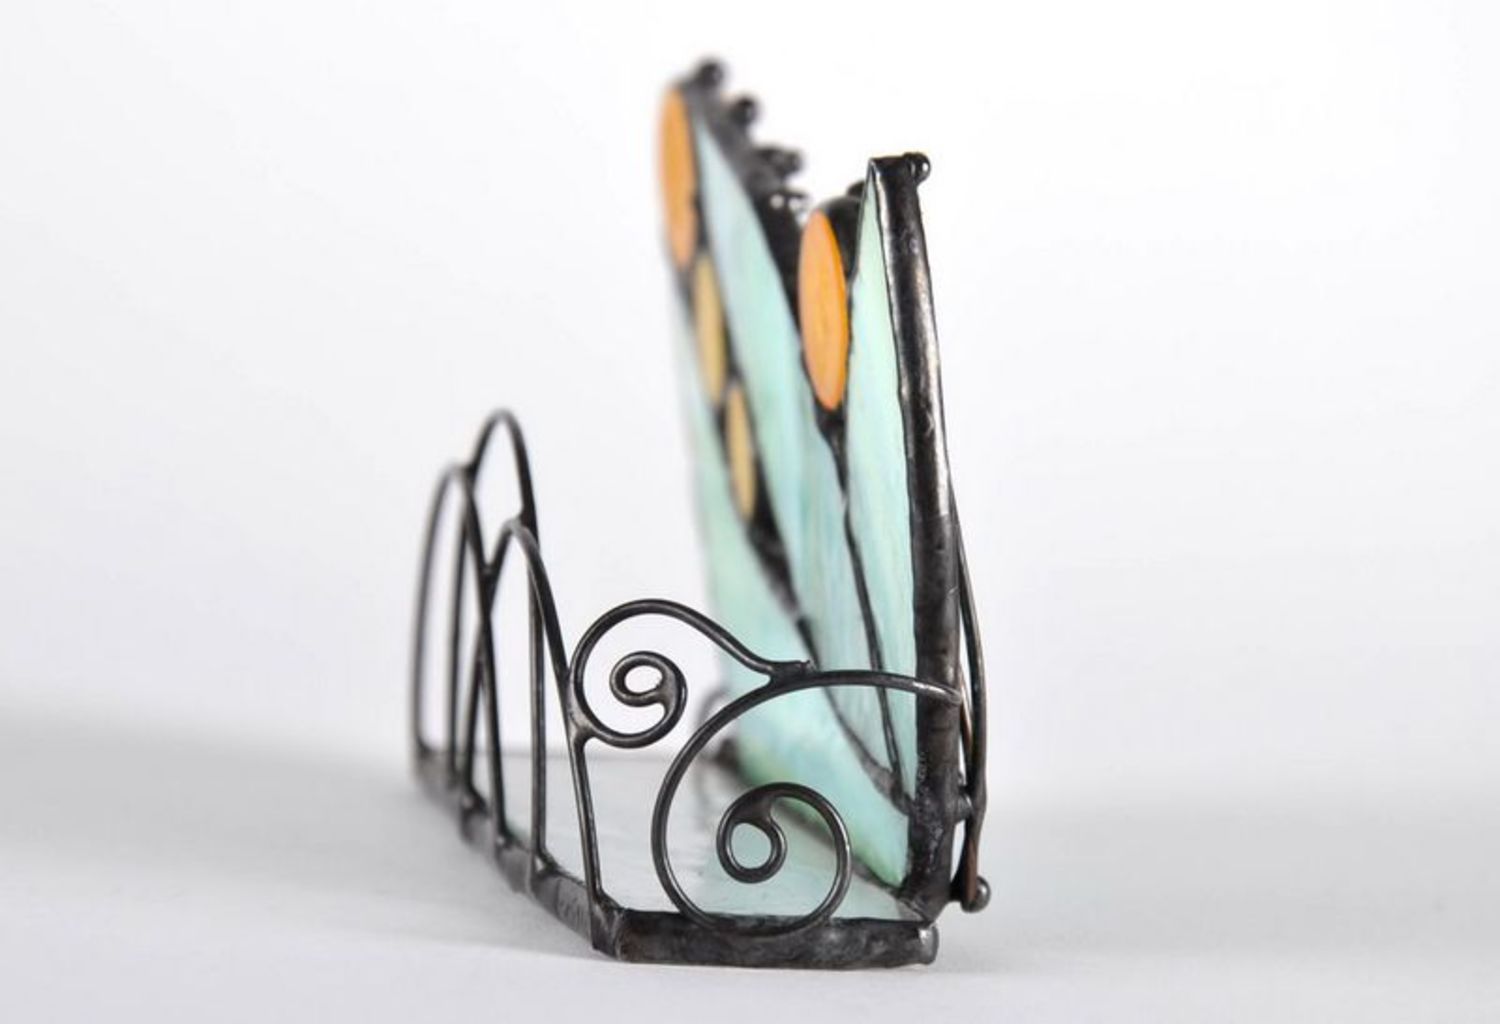 Stained glass business cards holder photo 3